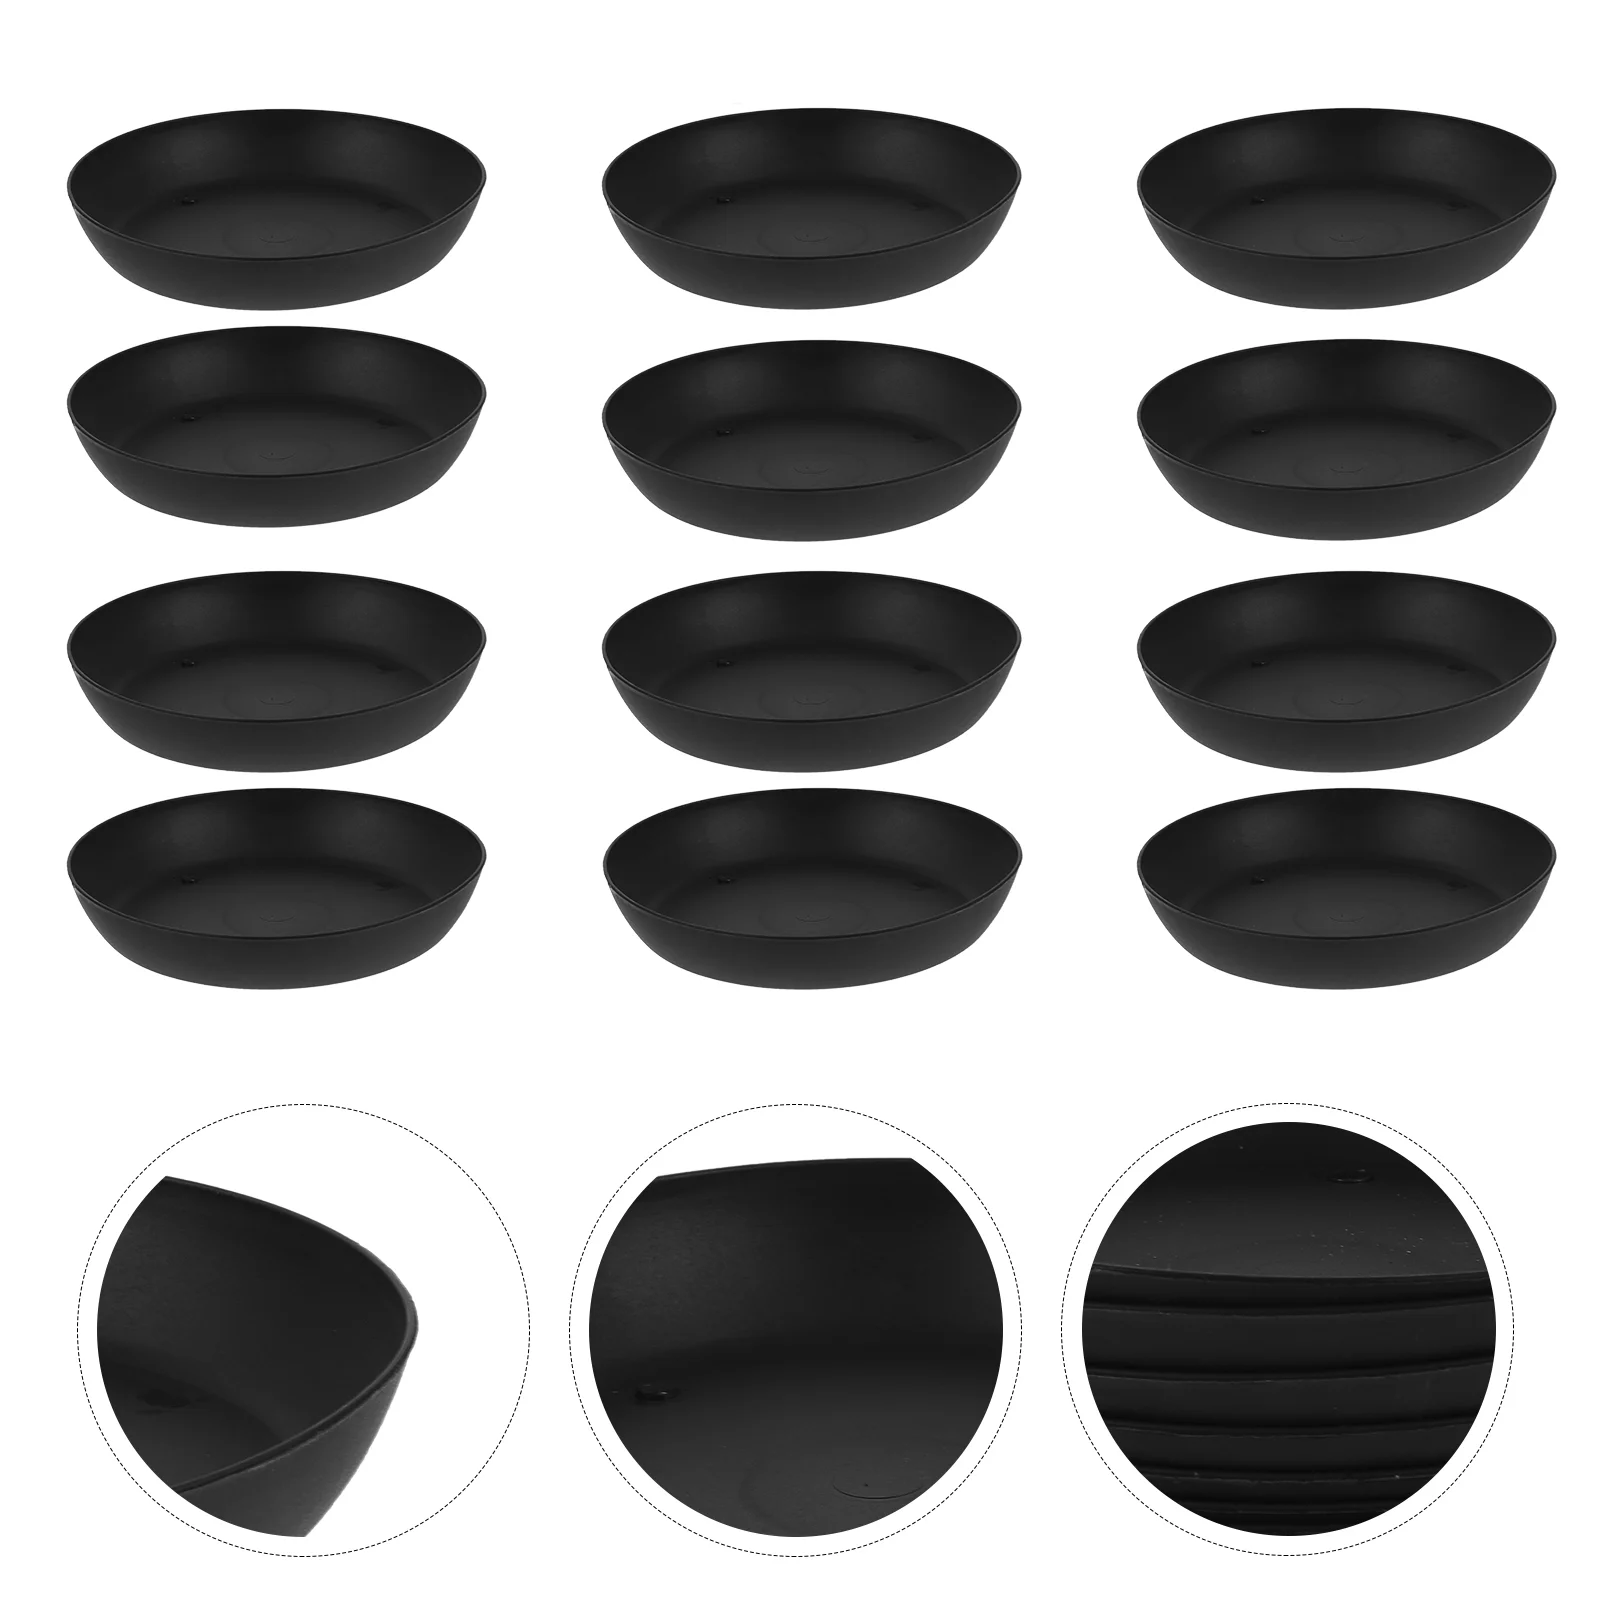 

30pcs Gardening Plant Pot Water Trays Indoor Flower Container Saucer (Black)